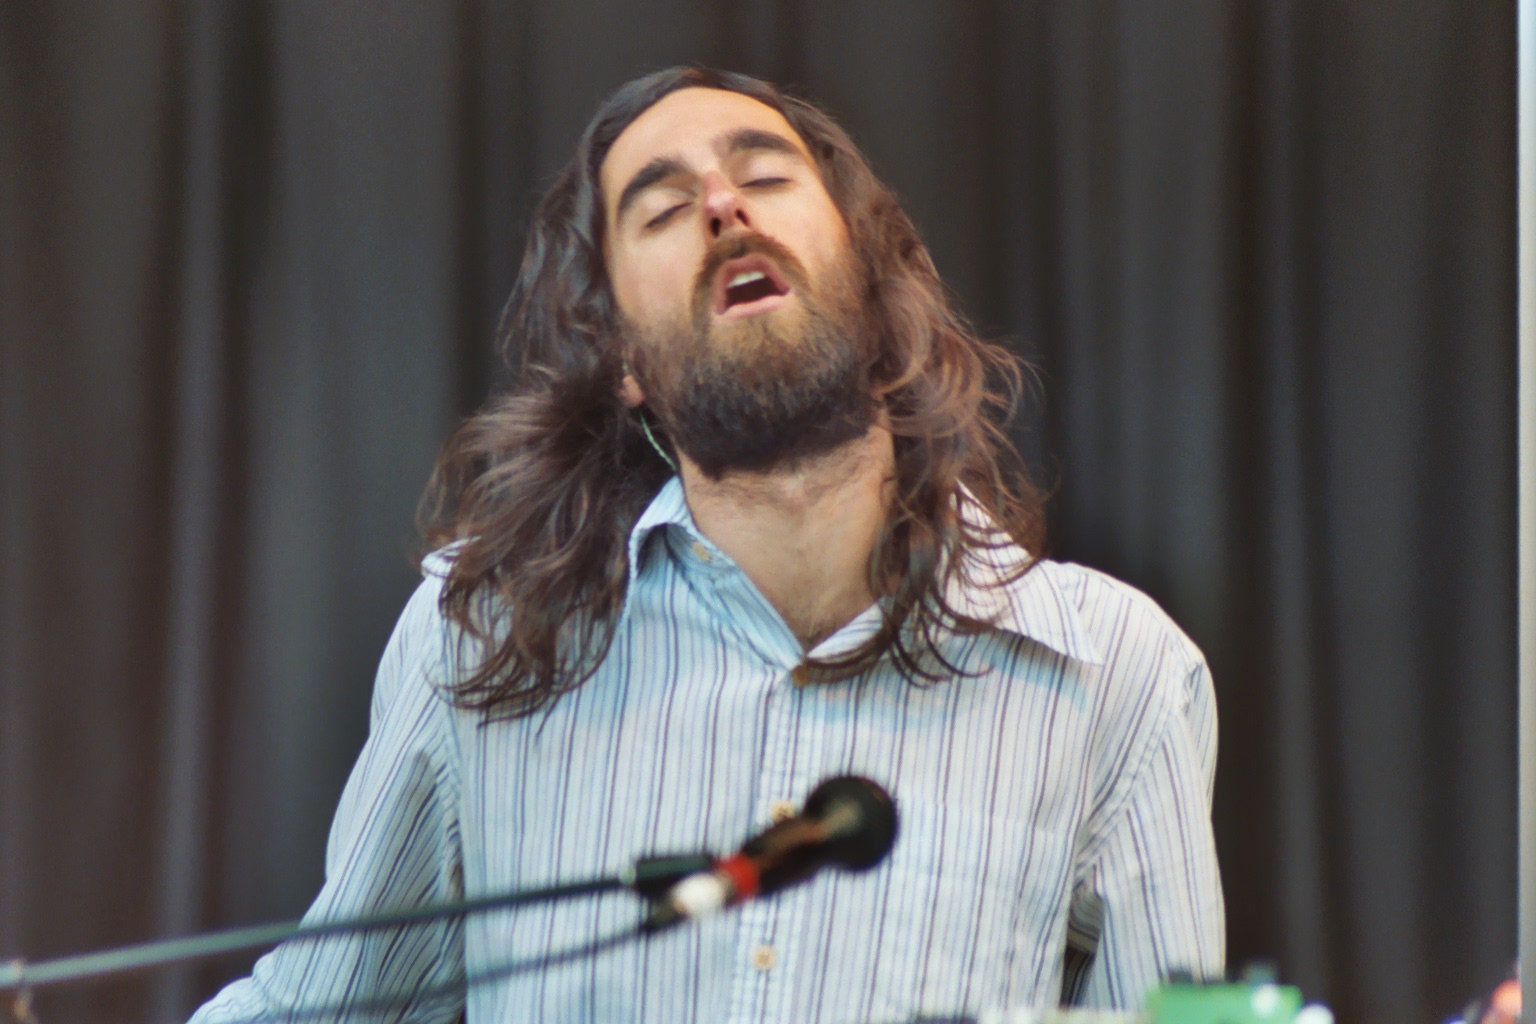 the bearded man has a microphone to sing and his eyes closed